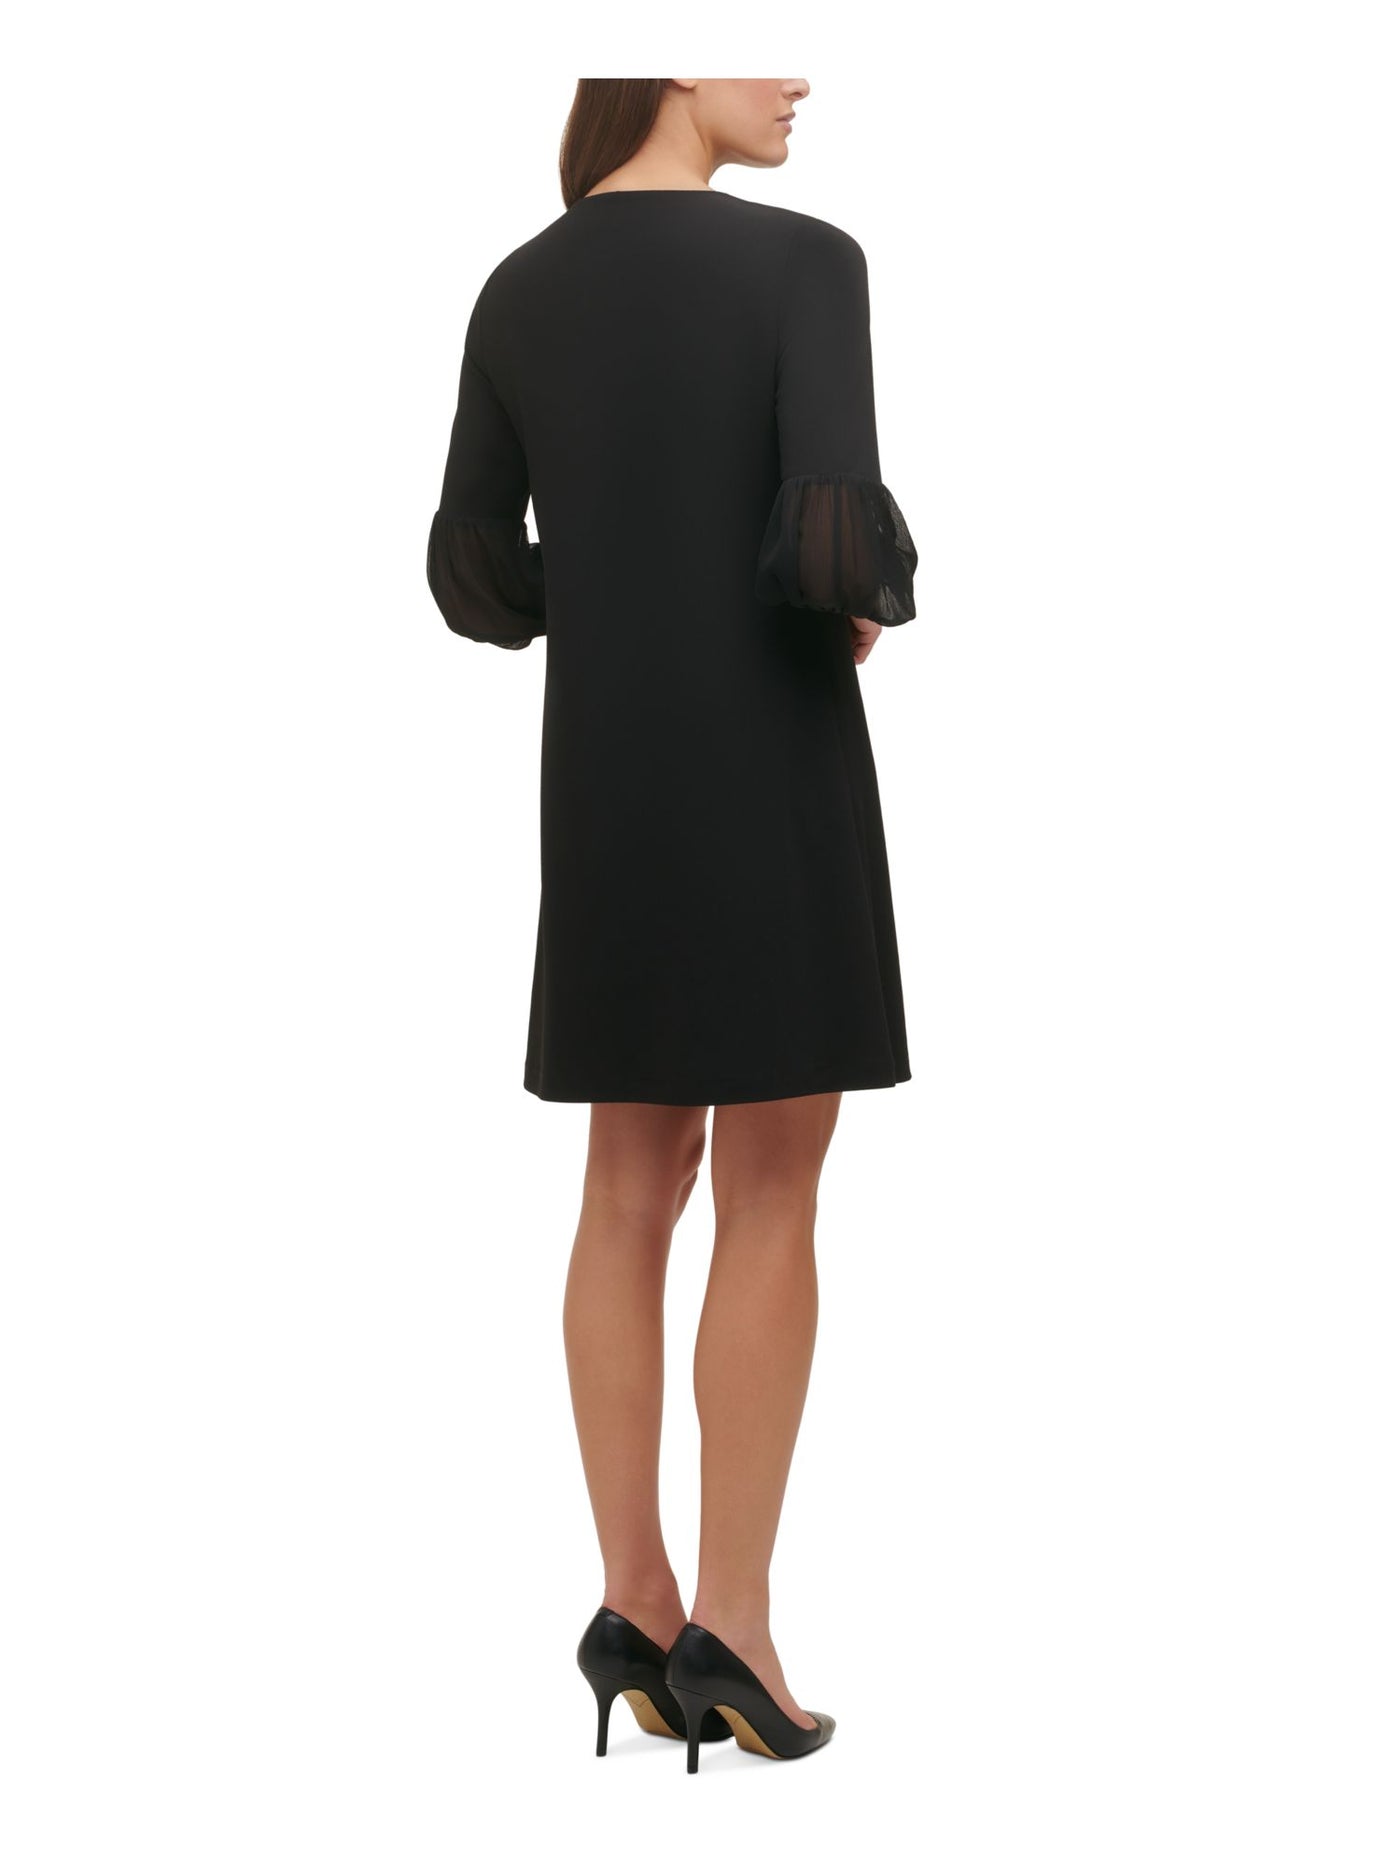 TOMMY HILFIGER Womens Black 3/4 Sleeve Above The Knee Cocktail Shift Dress 4